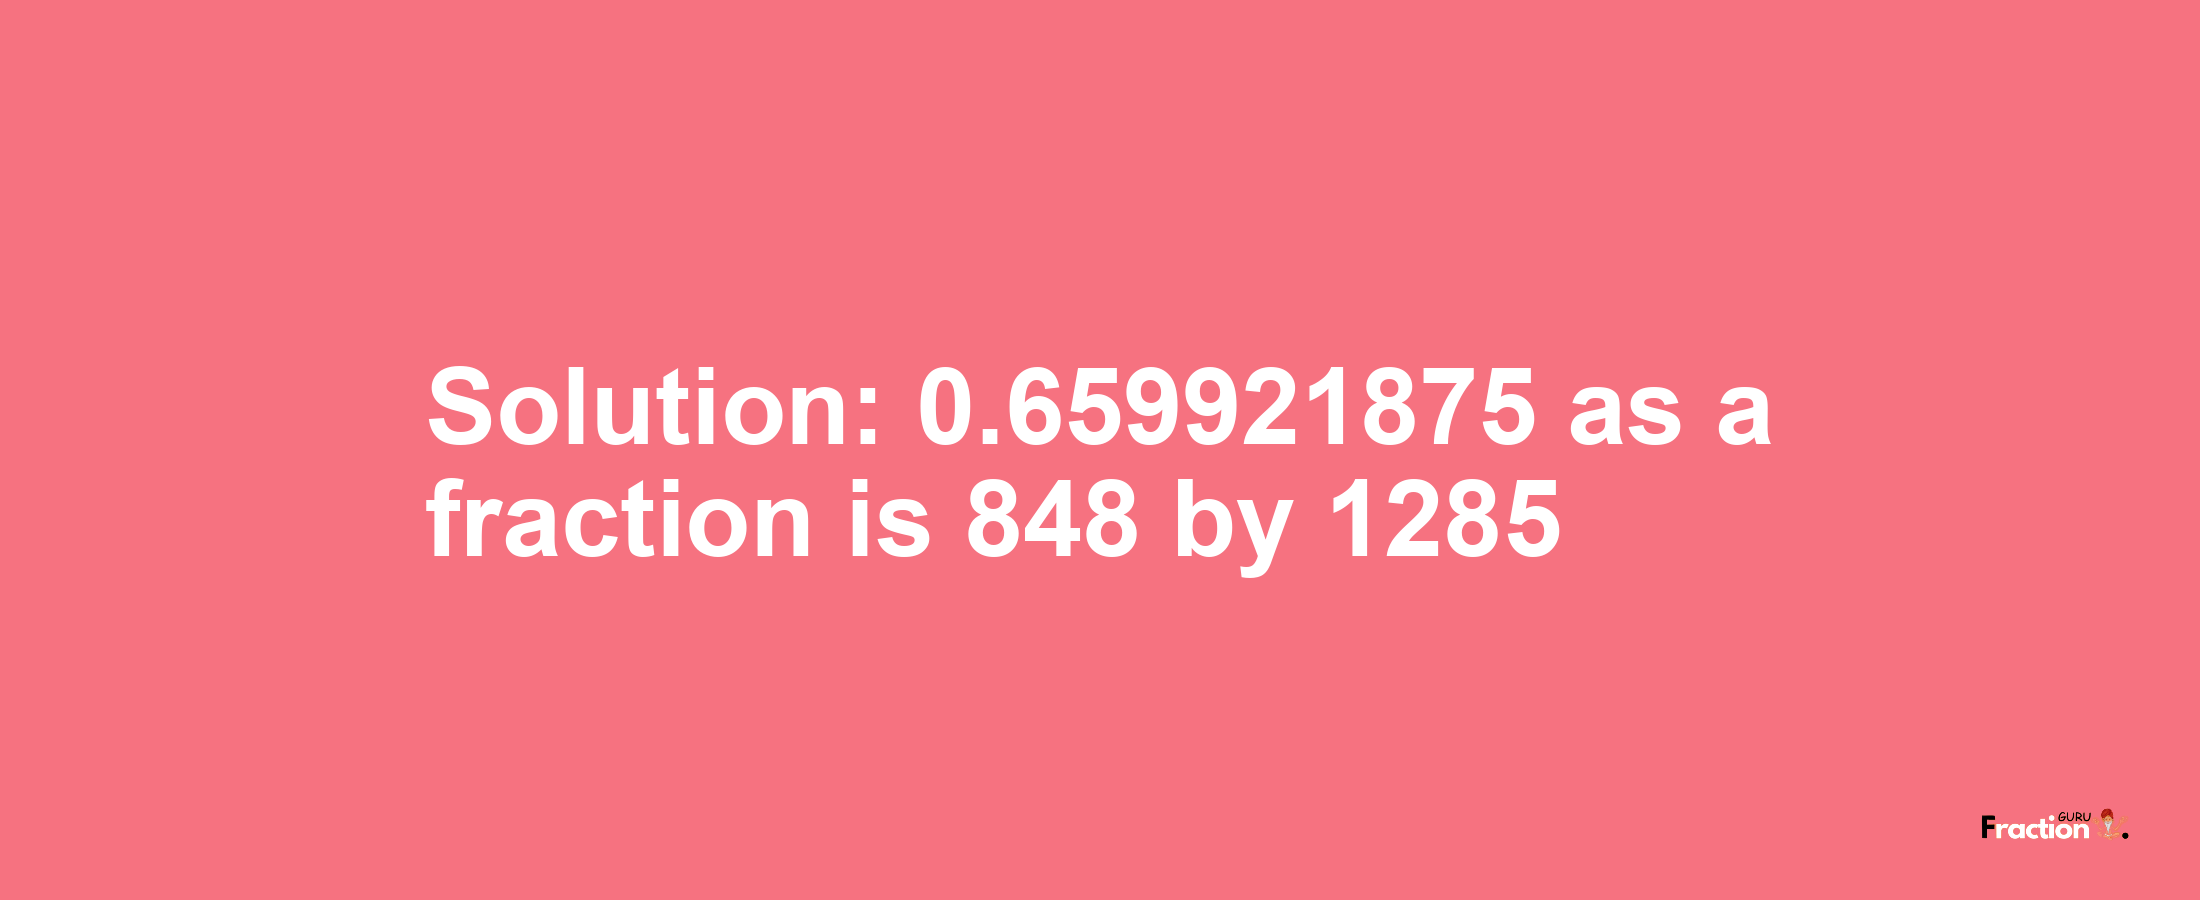 Solution:0.659921875 as a fraction is 848/1285